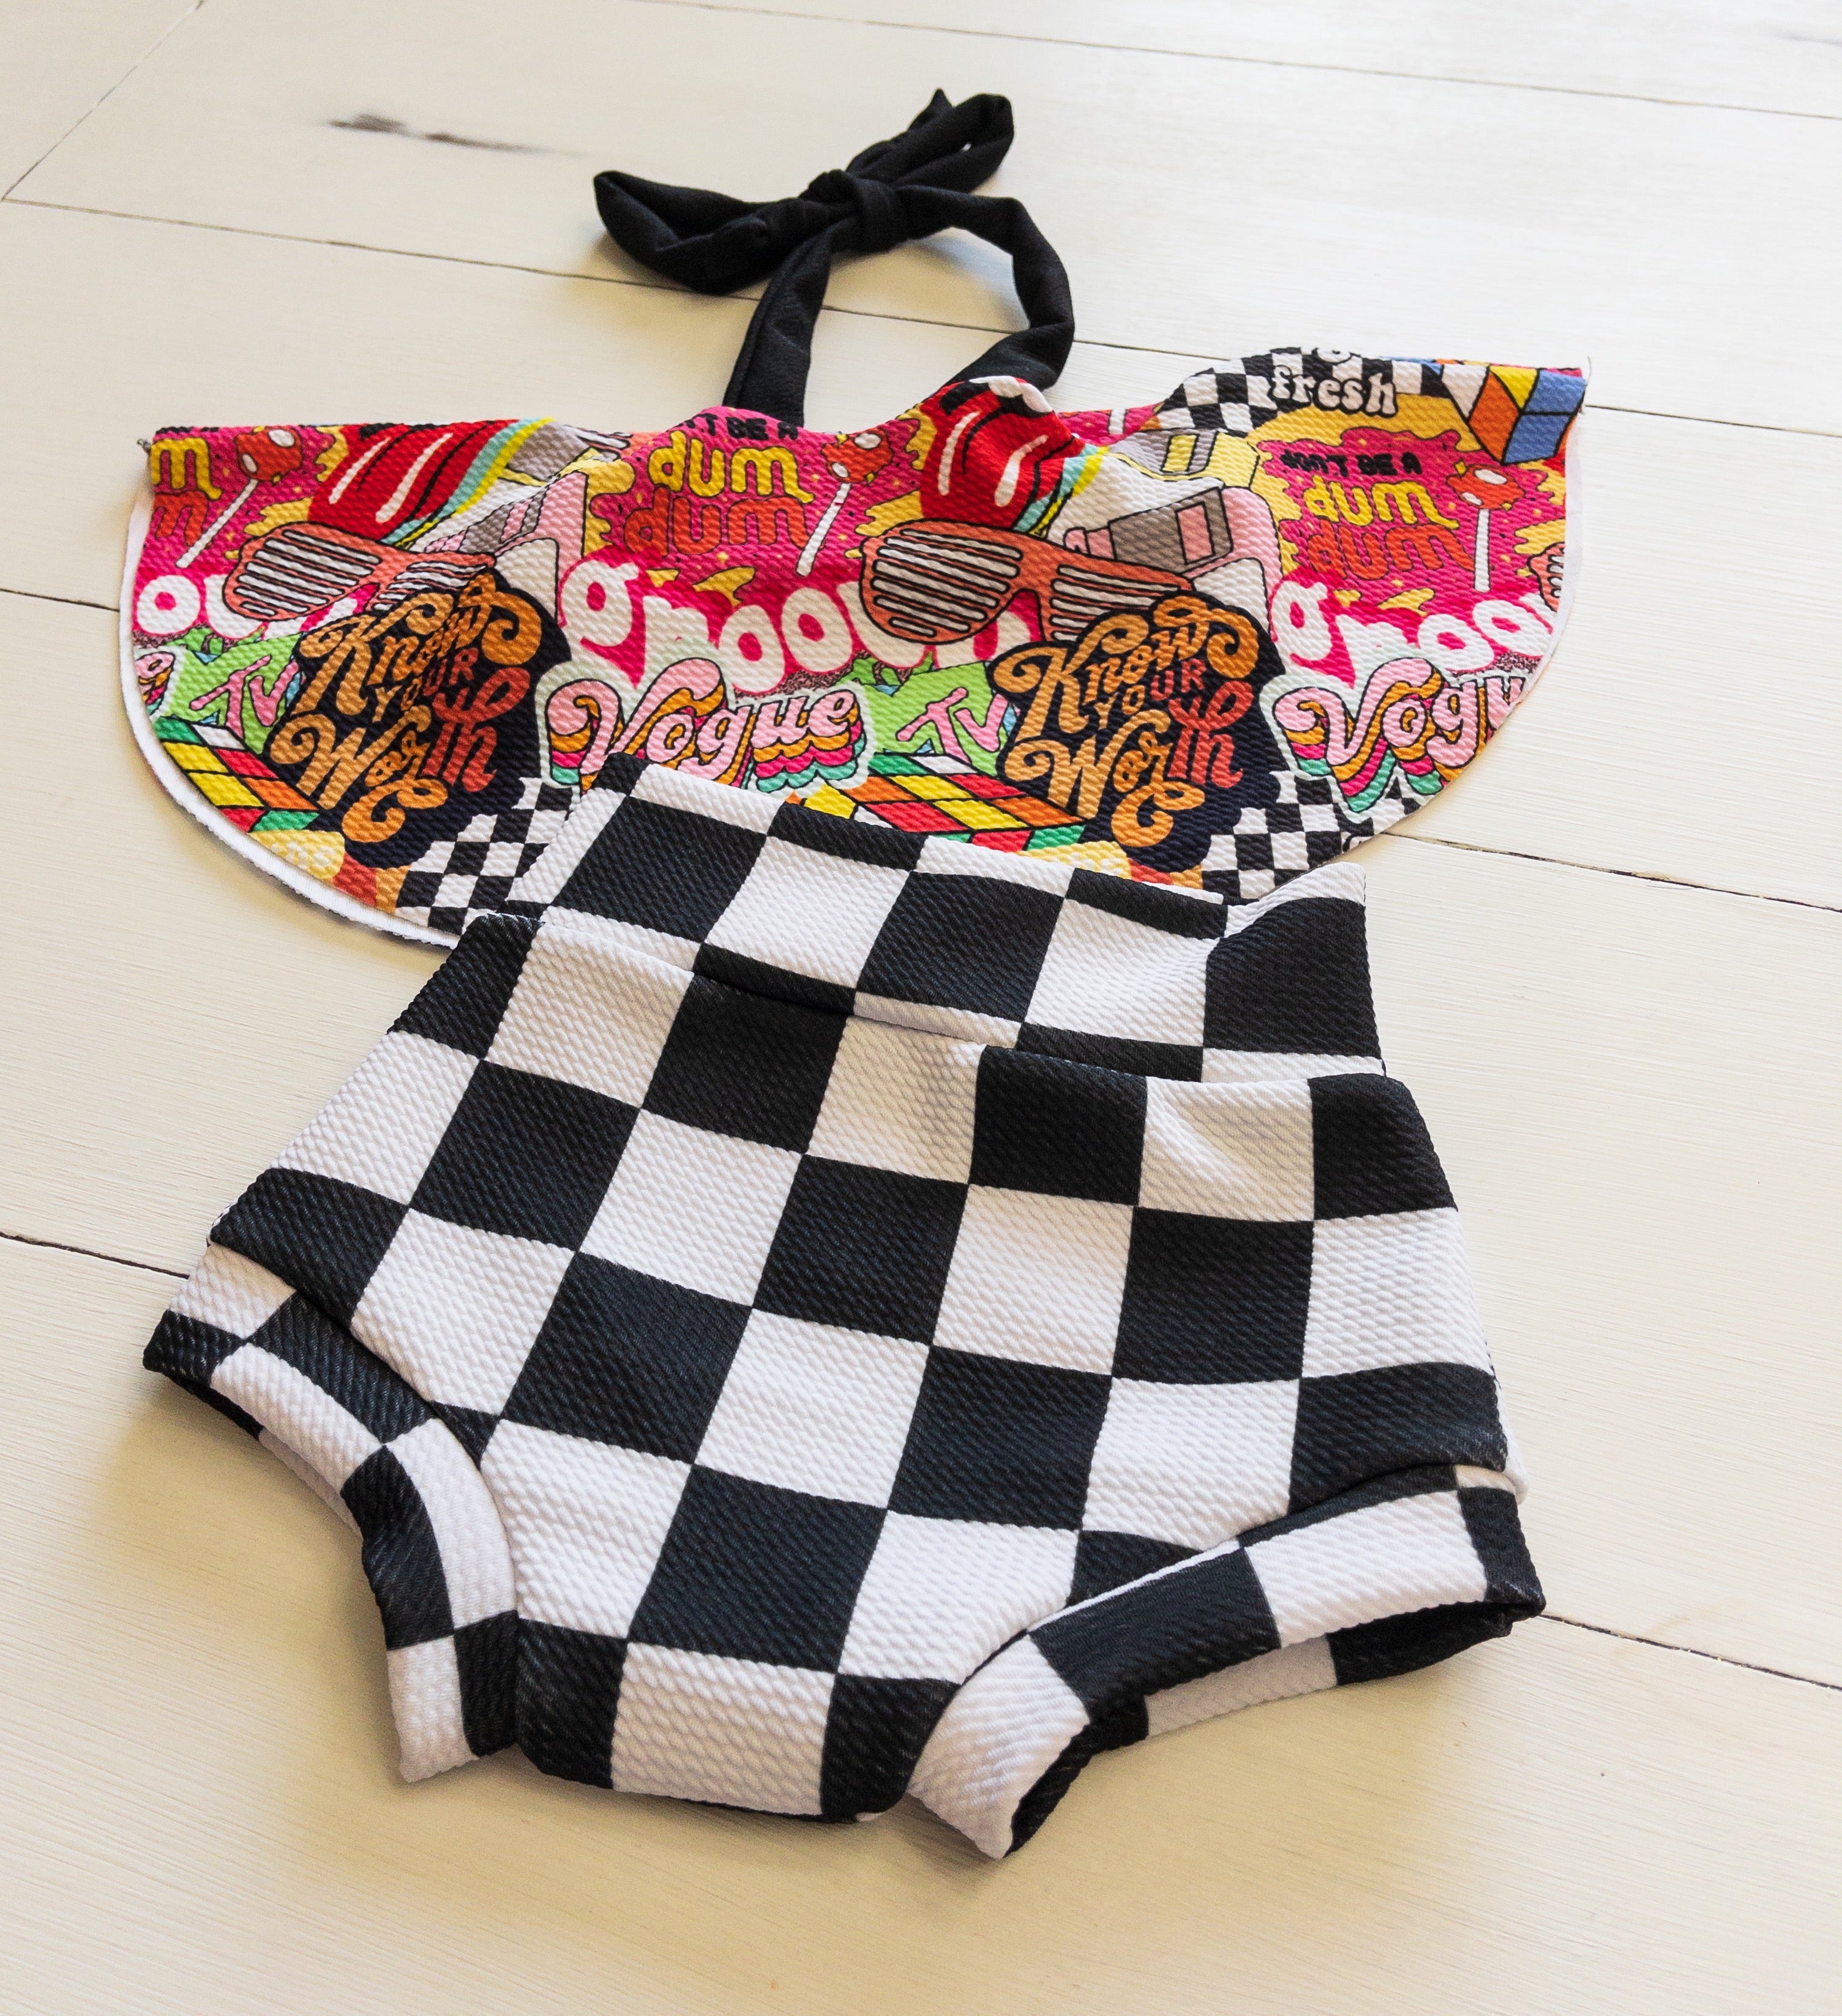 Groovy Vogue Baby Girl Outfit